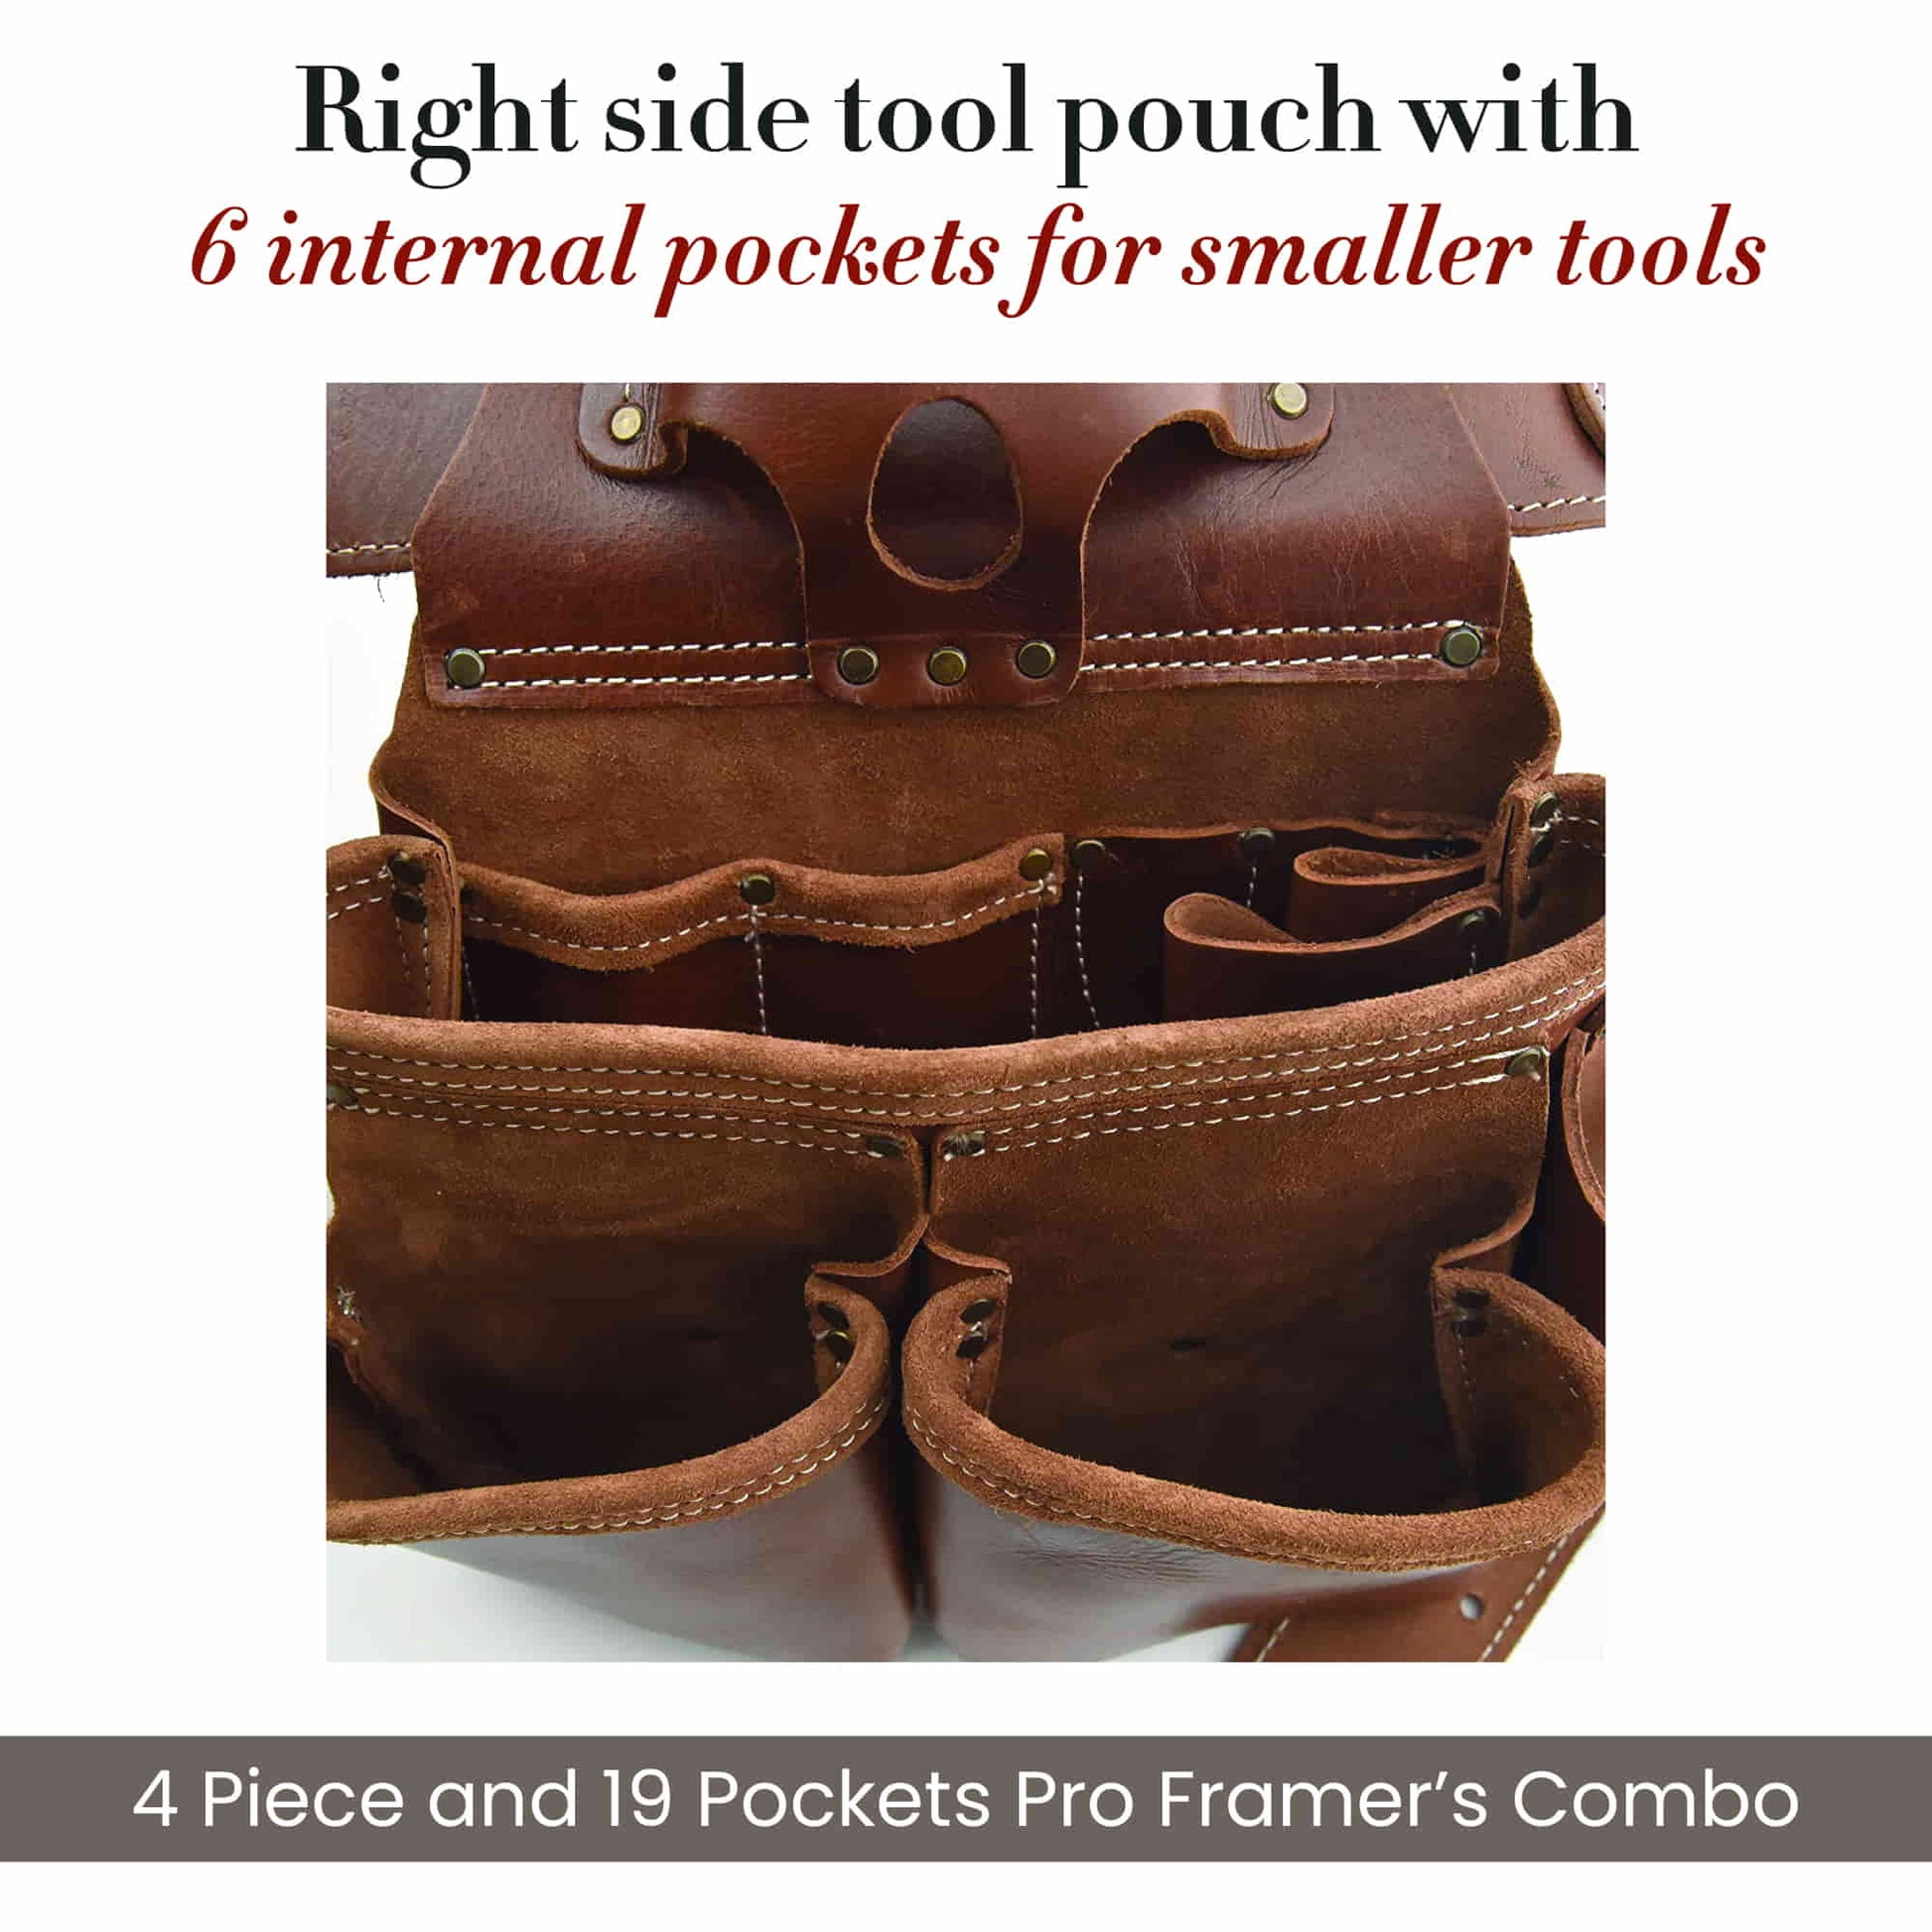 Style n Craft's 98444 - Inside View of the Right Side Pouch of the 4 Piece 19 Pocket Pro Framer’s Combo in Top Grain Leather in Dark Tan Color Showing the 6 Internal Pockets for Smaller Tools